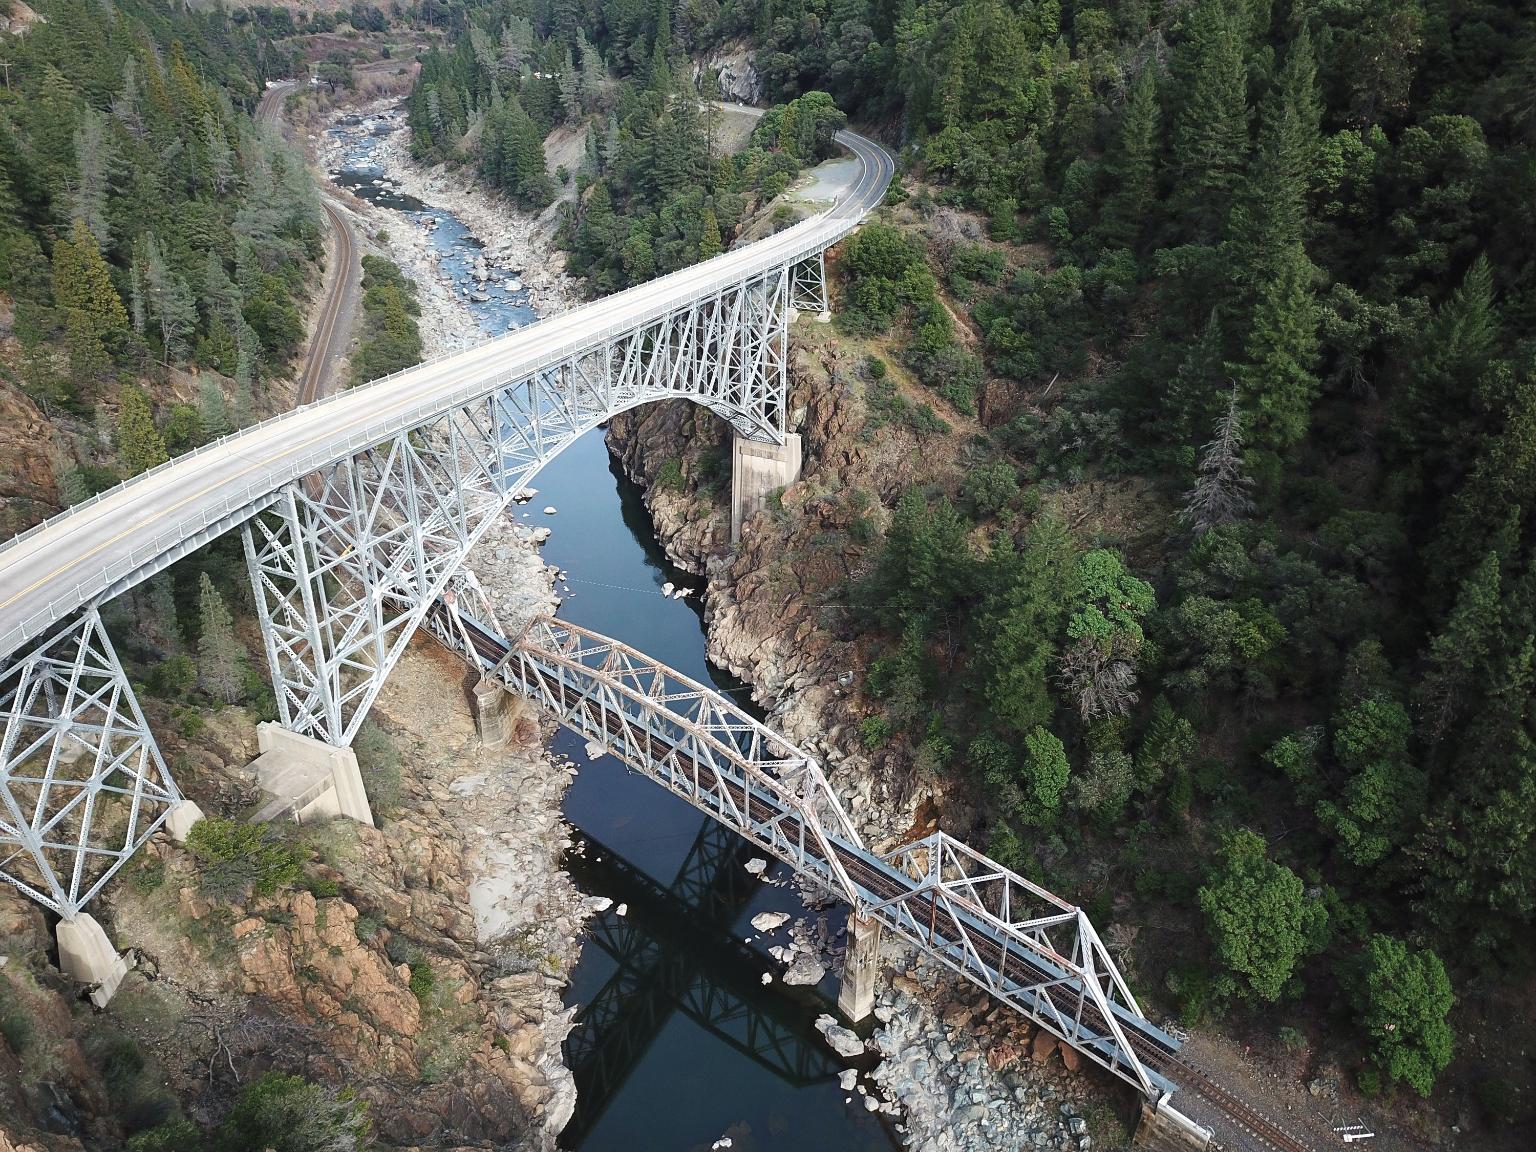 A Union Pacifc drone captured this image during a culvert inspection demonstration in Pulga, California.